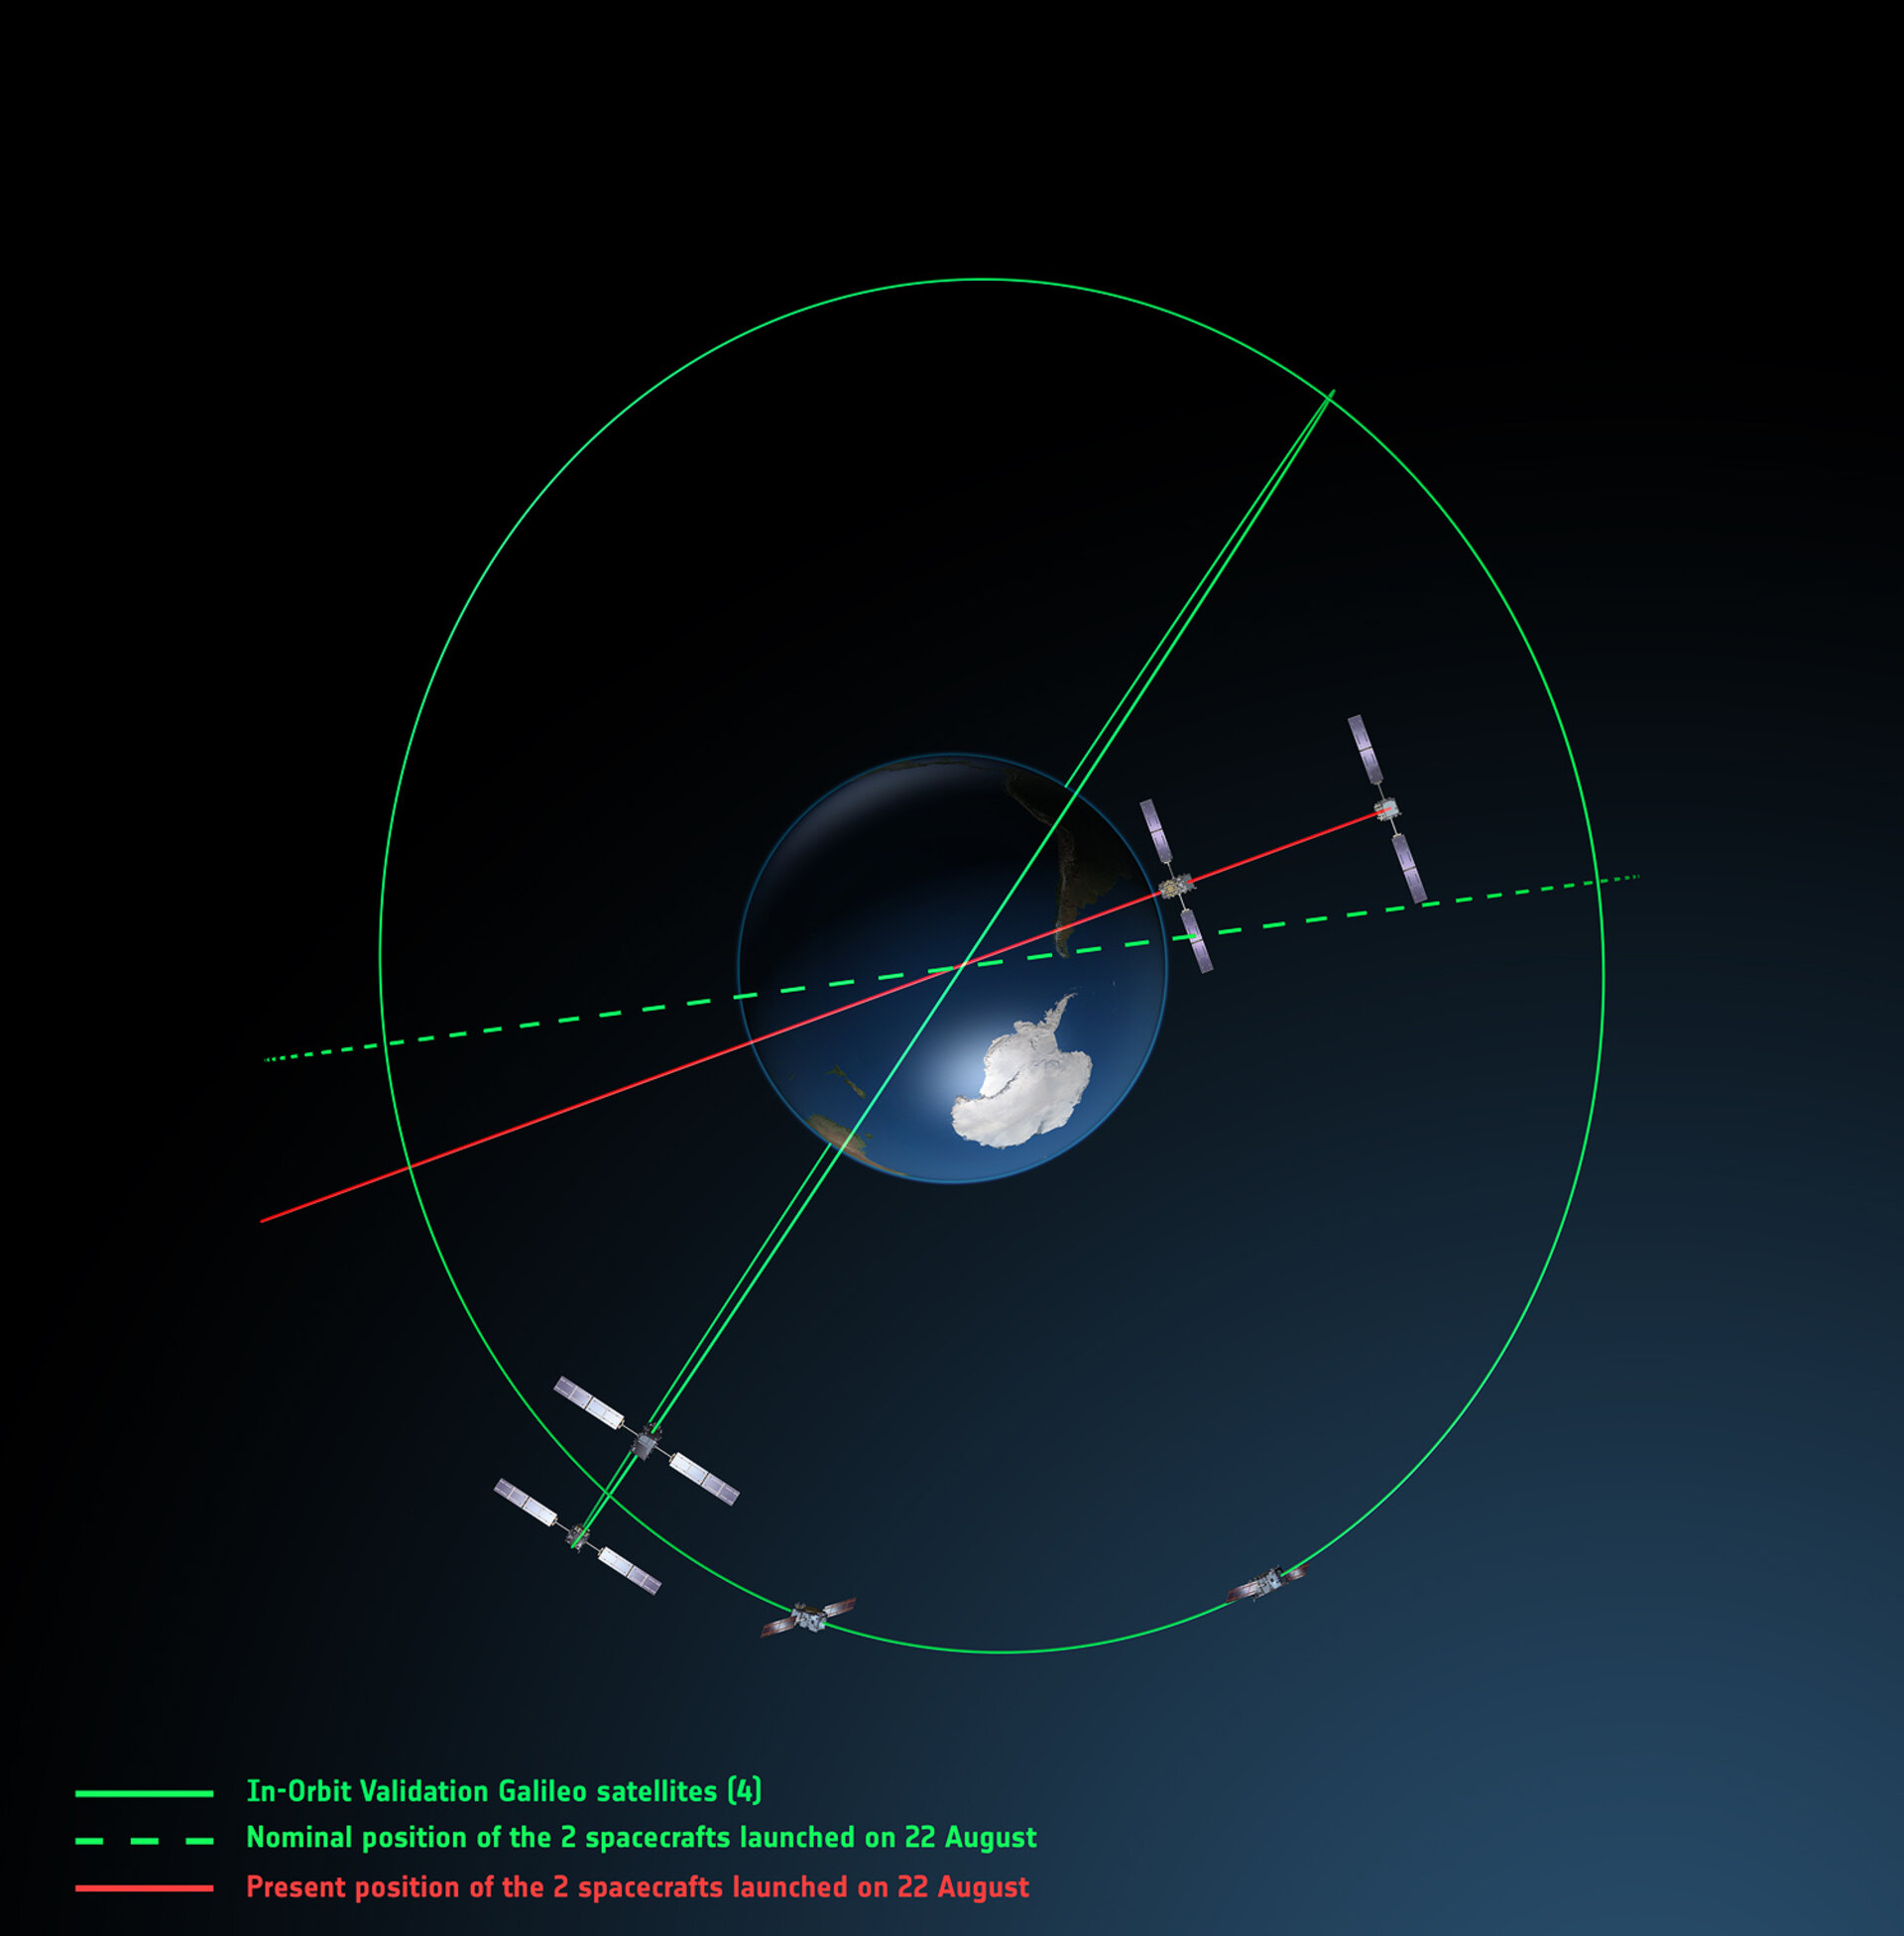 Galileo orbits viewed from above